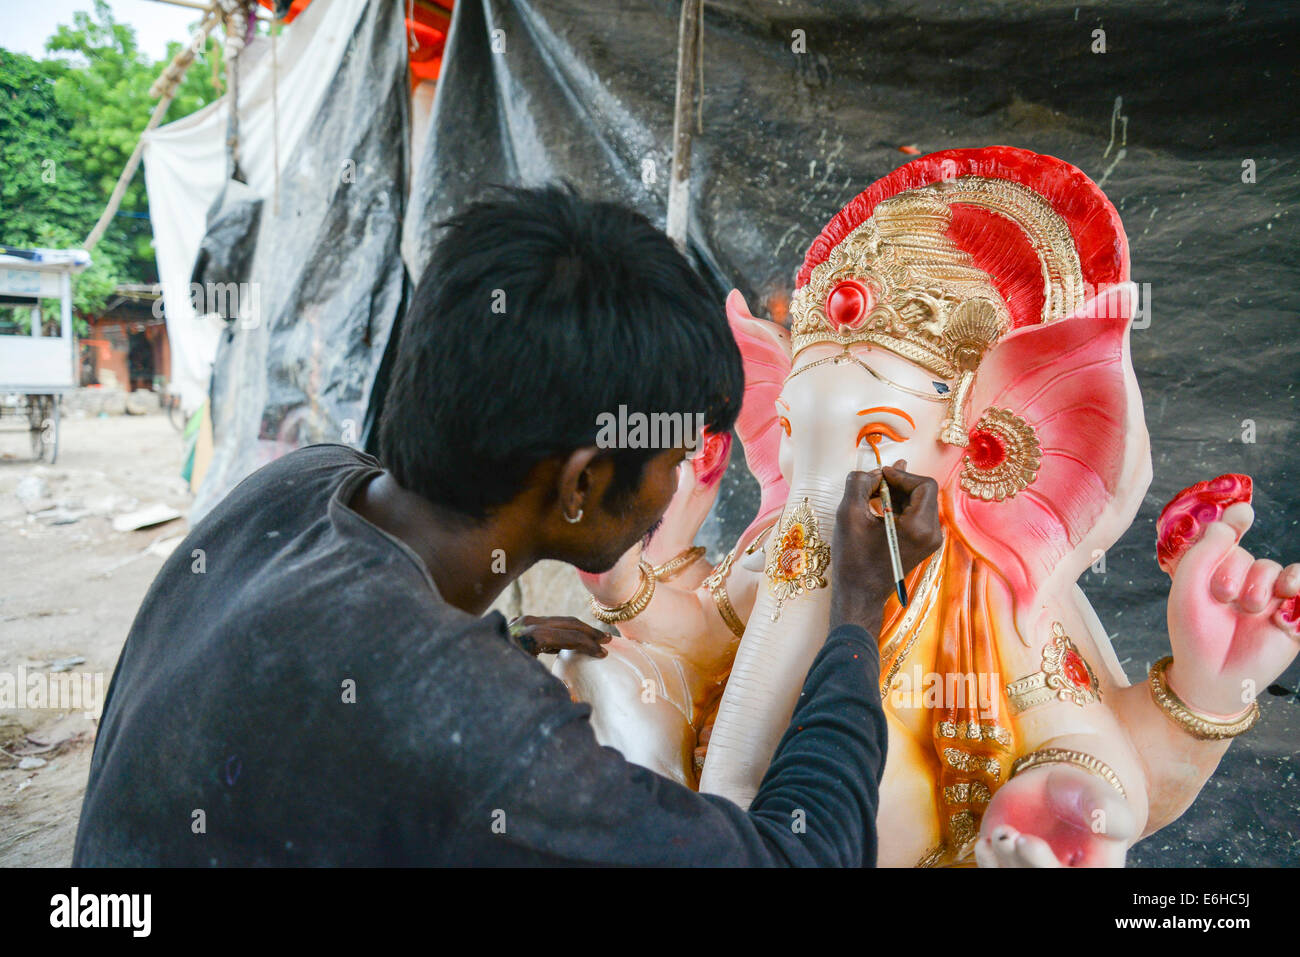 Ahmedabad, Gujarat, India, 24th Aug, 2014. :Artist working on the final touchup before sale,Gulbai tekra is the single largest supplier of Ganesha idols in Ahmedabad, Gujarat India. Credit:  Nisarg Lakhmani/Alamy Live News Stock Photo